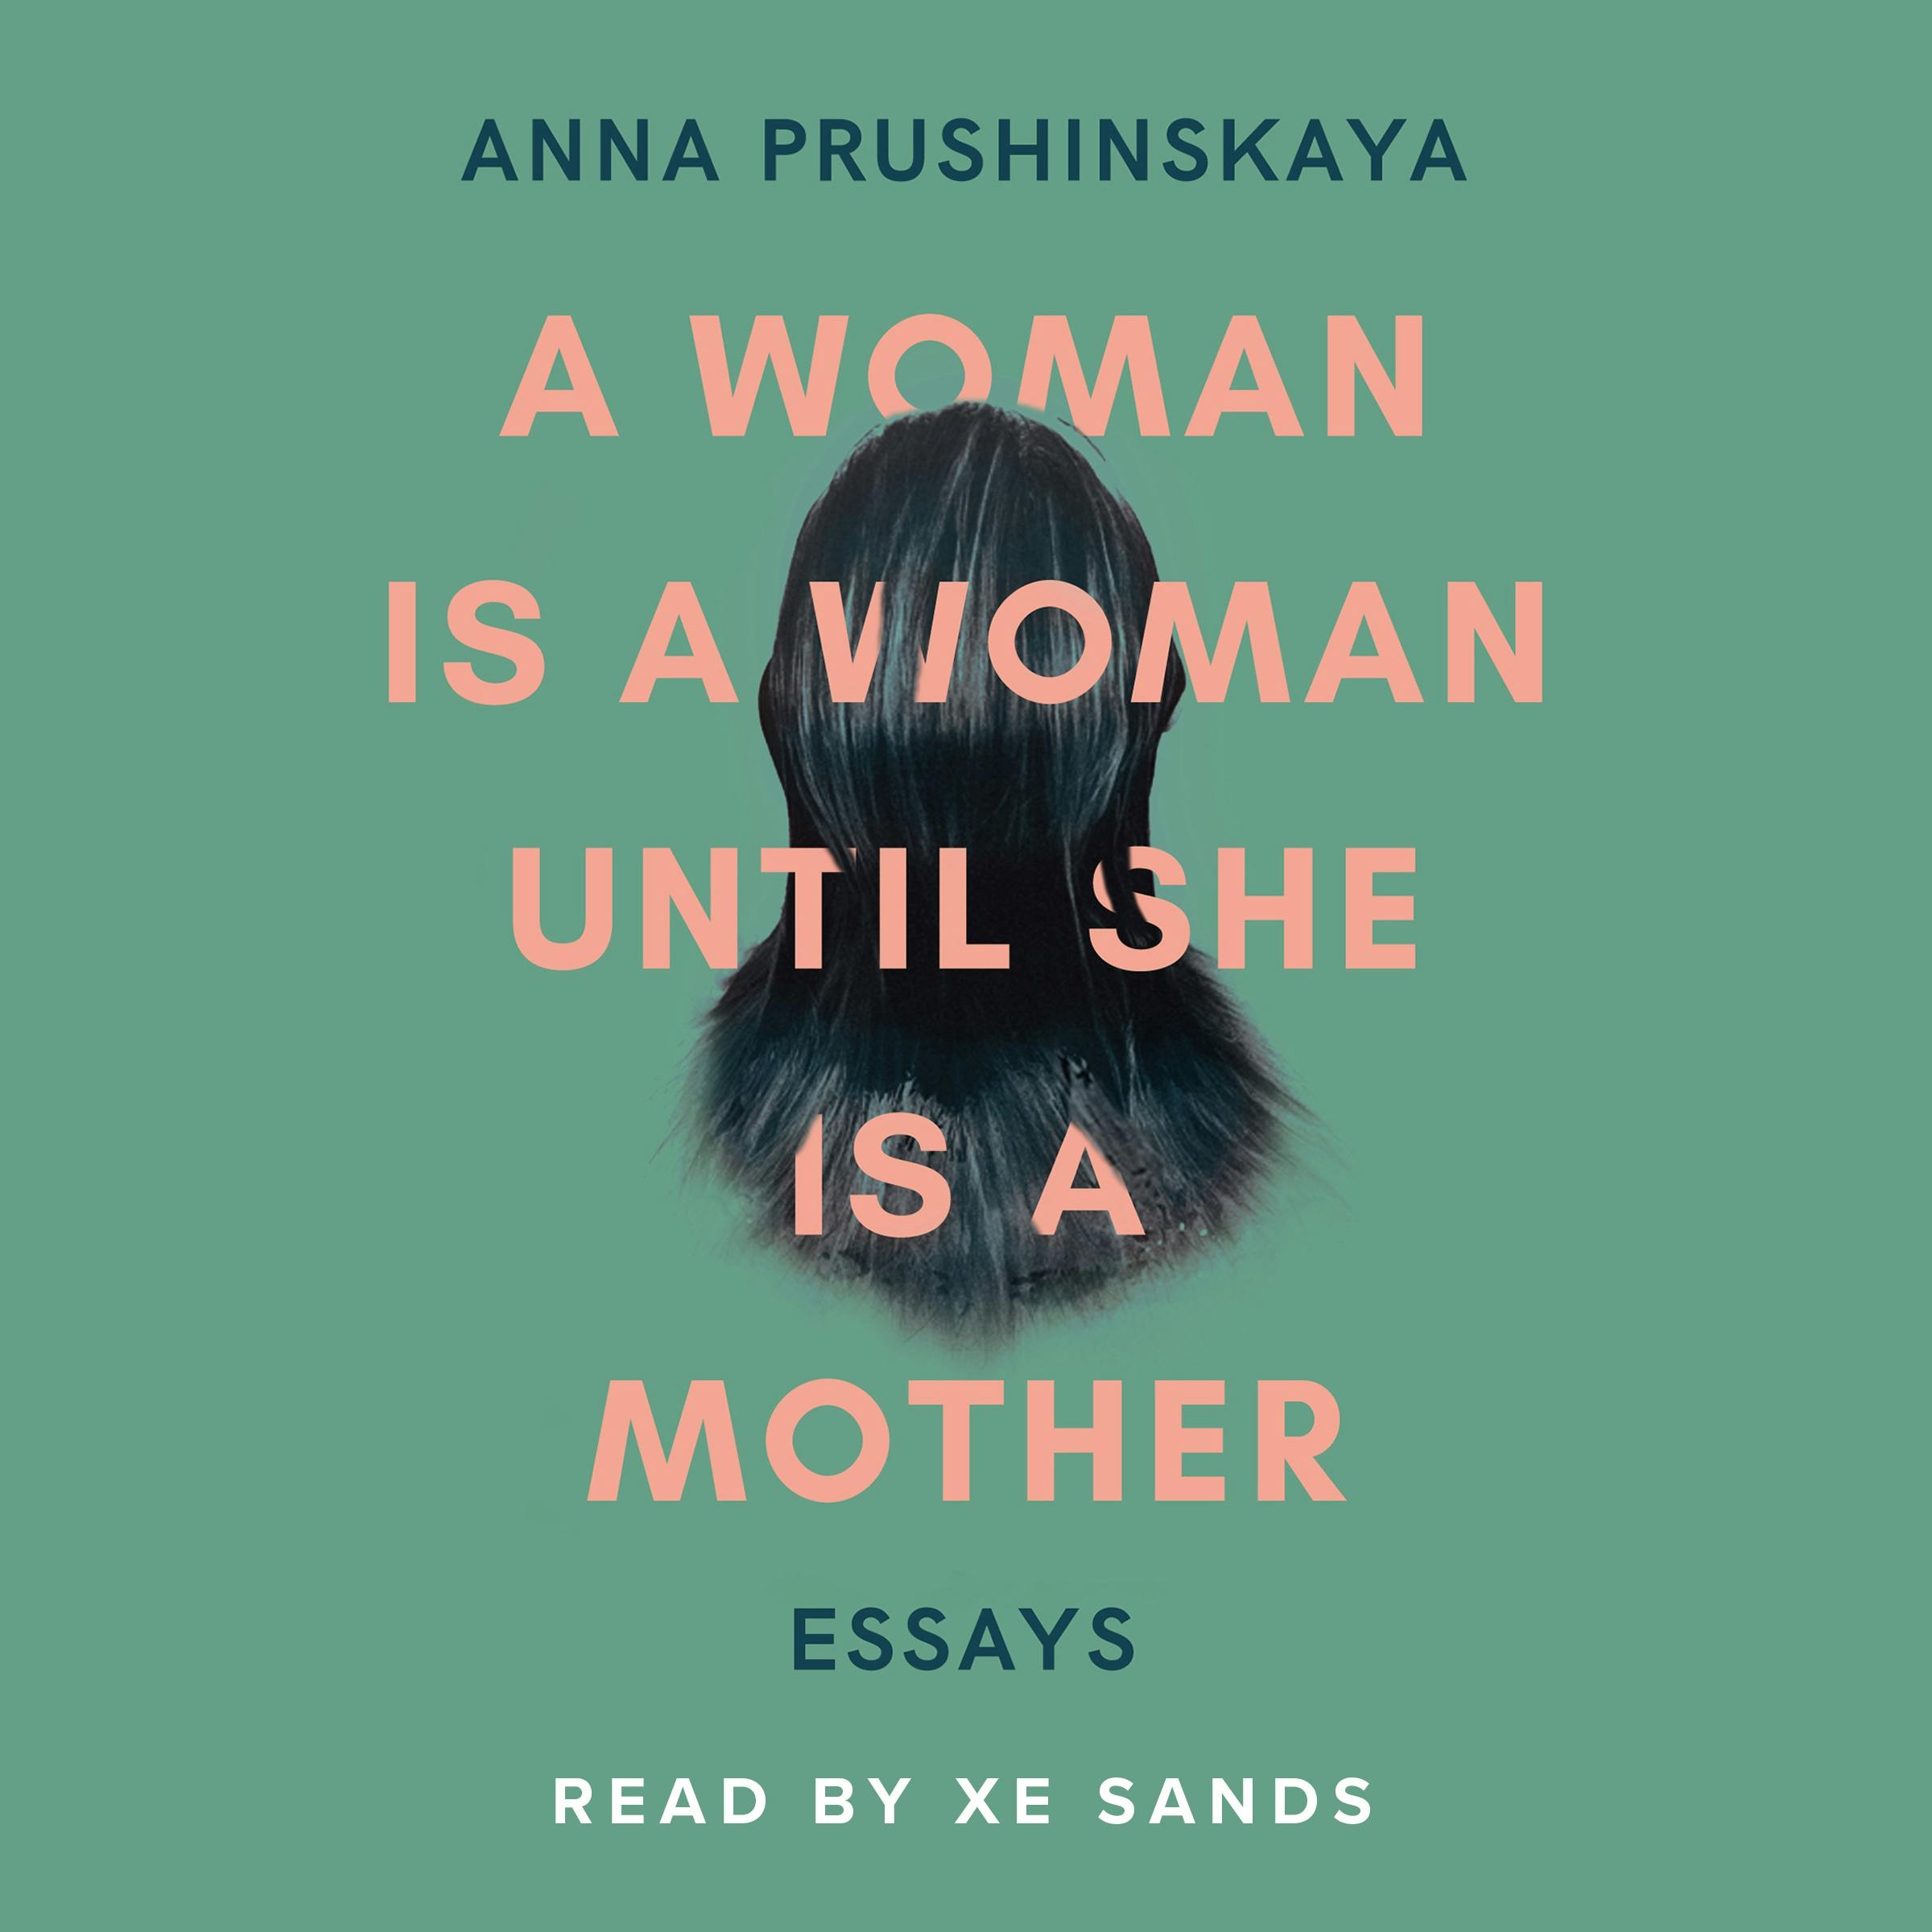 A Woman Is a Woman Until She Is a Mother: Essays - Anna Prushinskaya